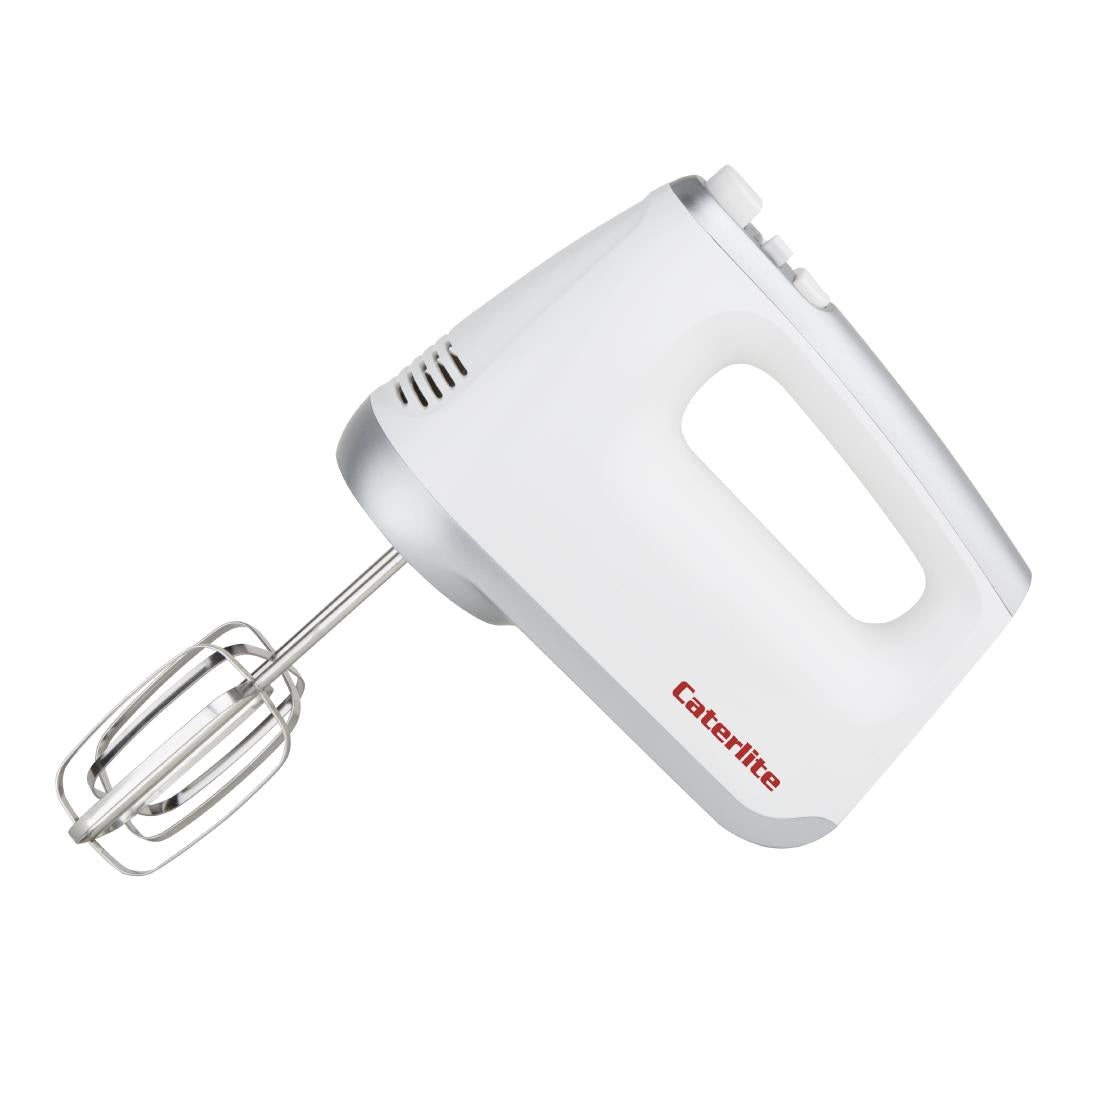 BW002 Caterlite Hand Mixer JD Catering Equipment Solutions Ltd